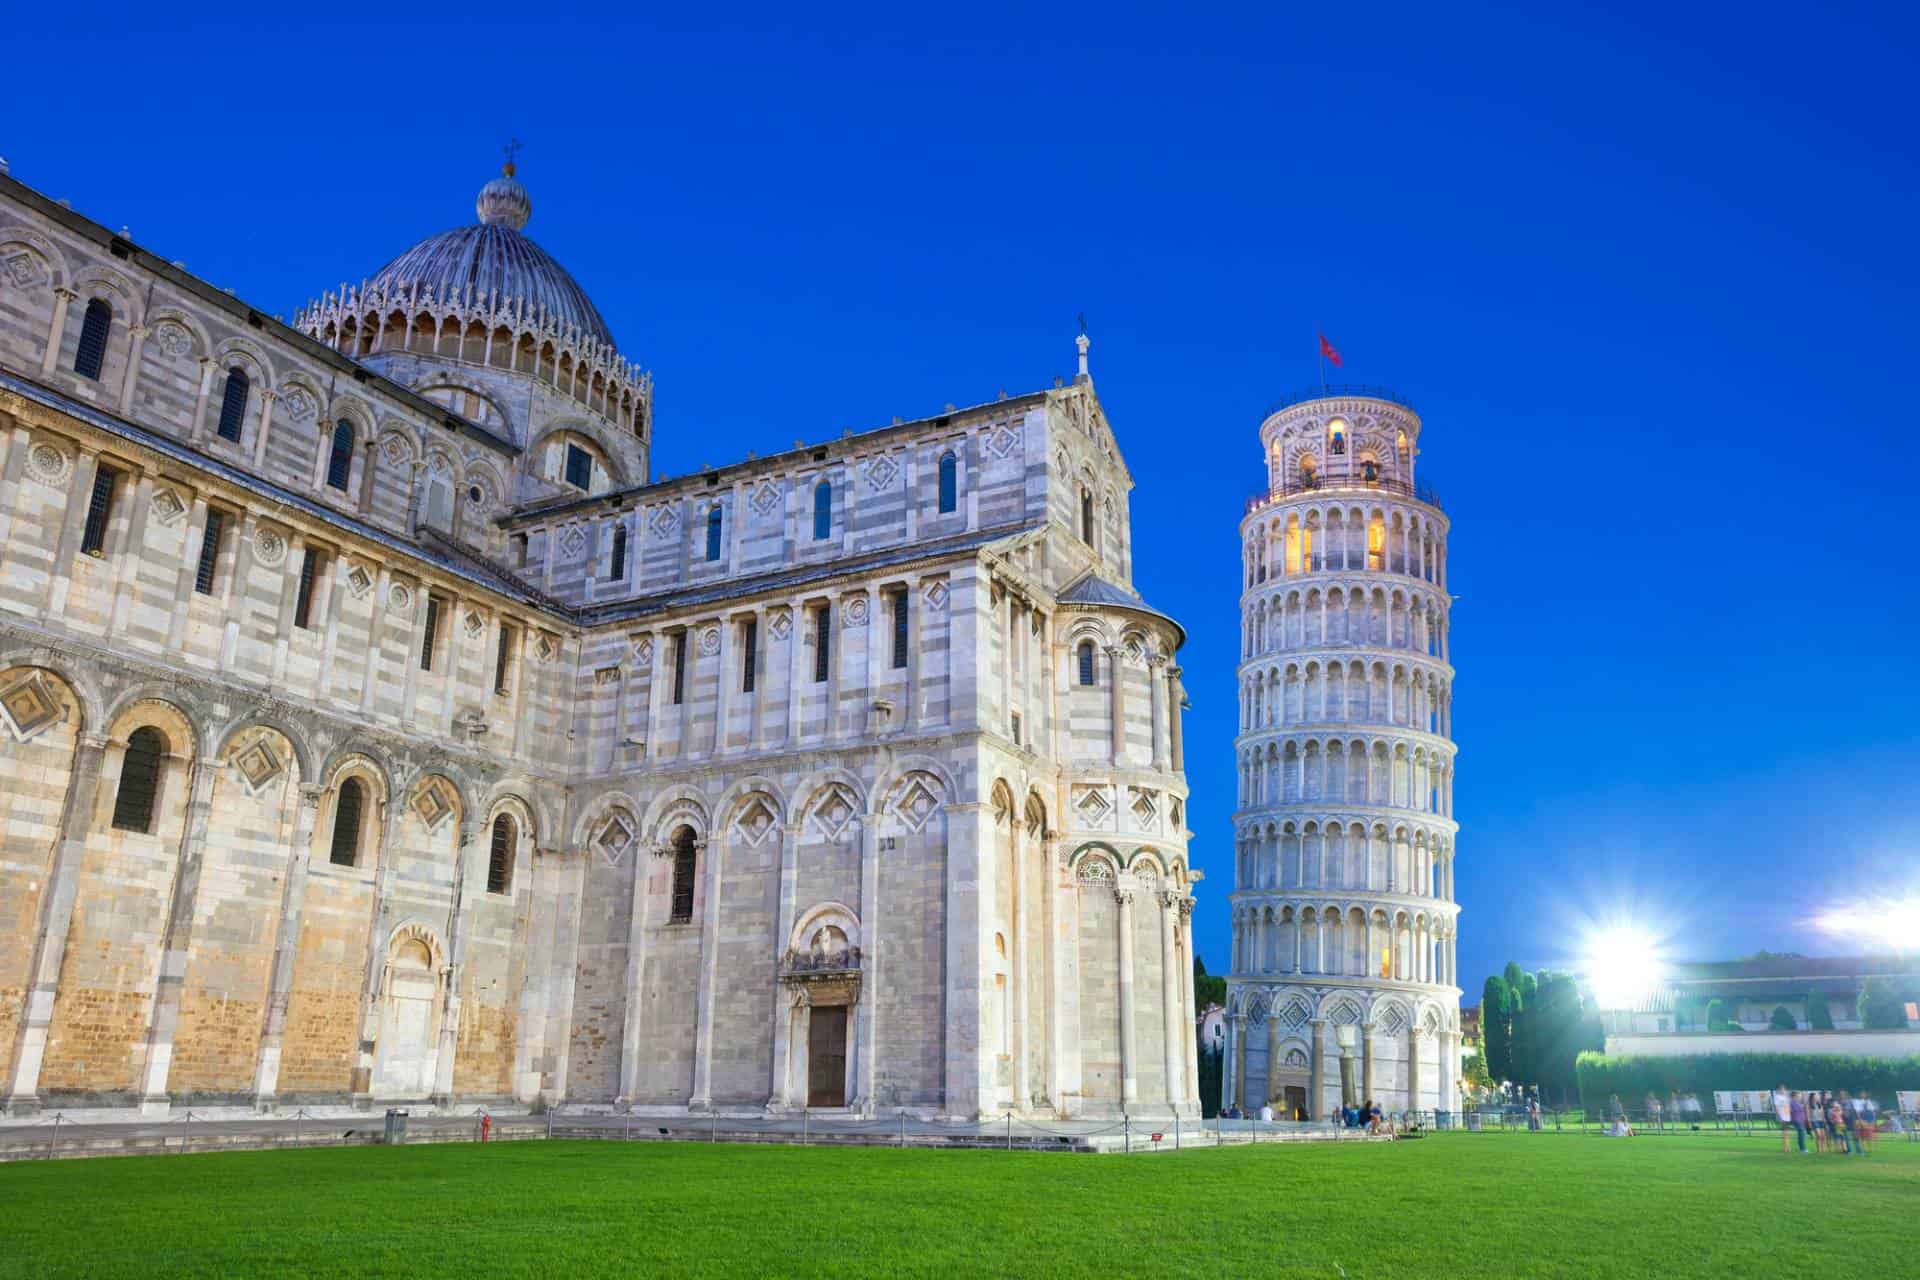 What are some of the major architectural wonders and attractions across Europe?